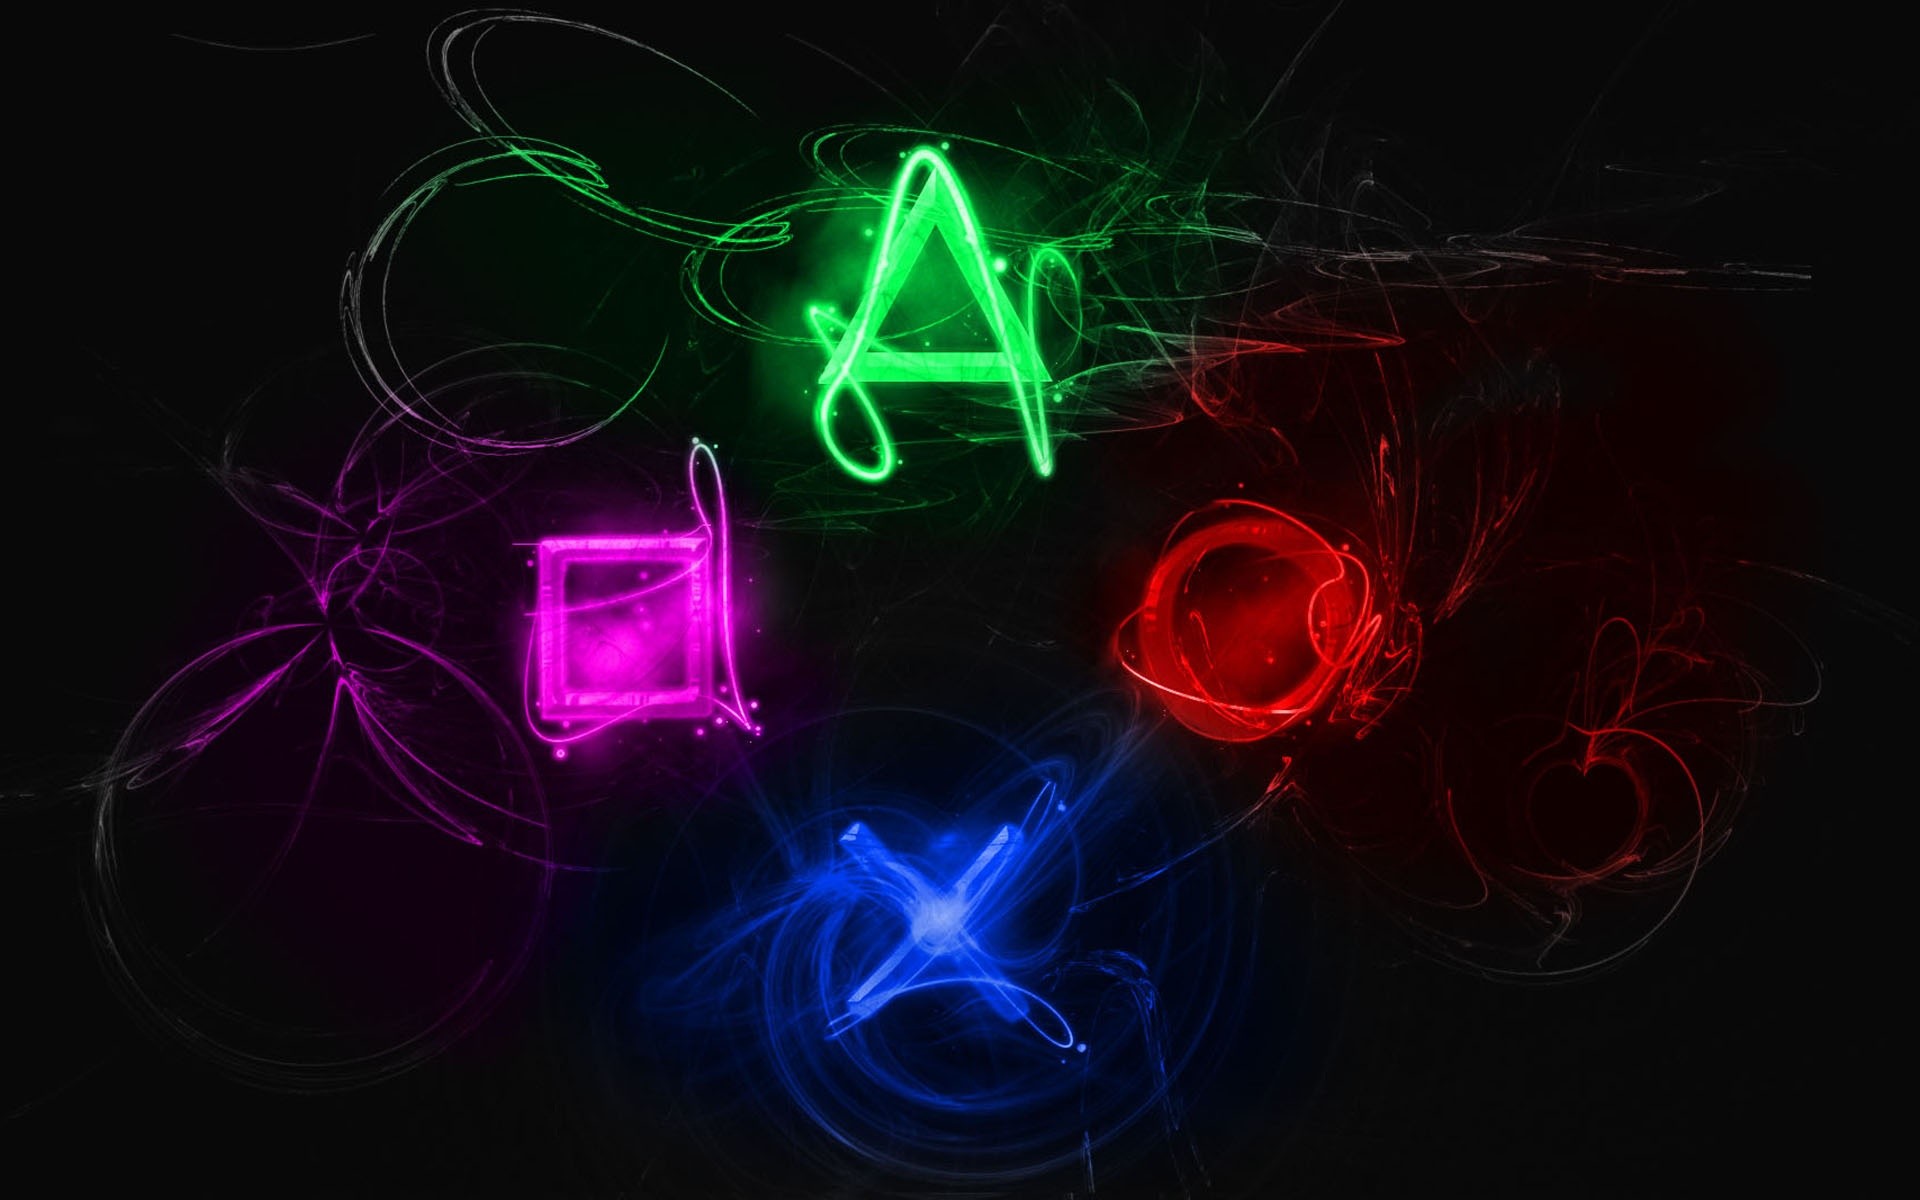 1920x1200 Sony Psp Firmware Ppdates - HD Wallpapers Widescreen .